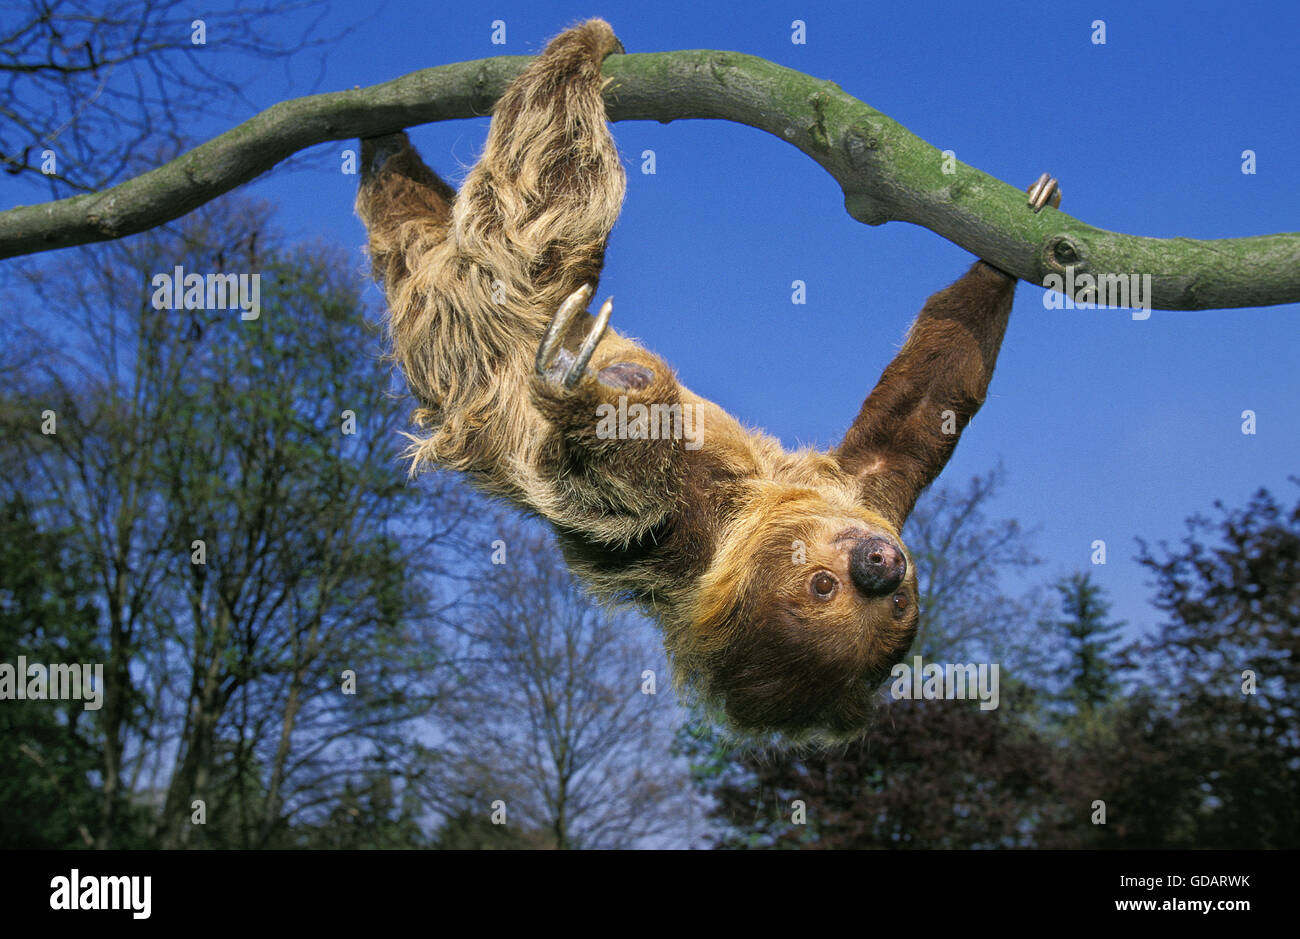 Two Toed Sloth, choloepus didactylus, Adult hanging from Branch Stock Photo